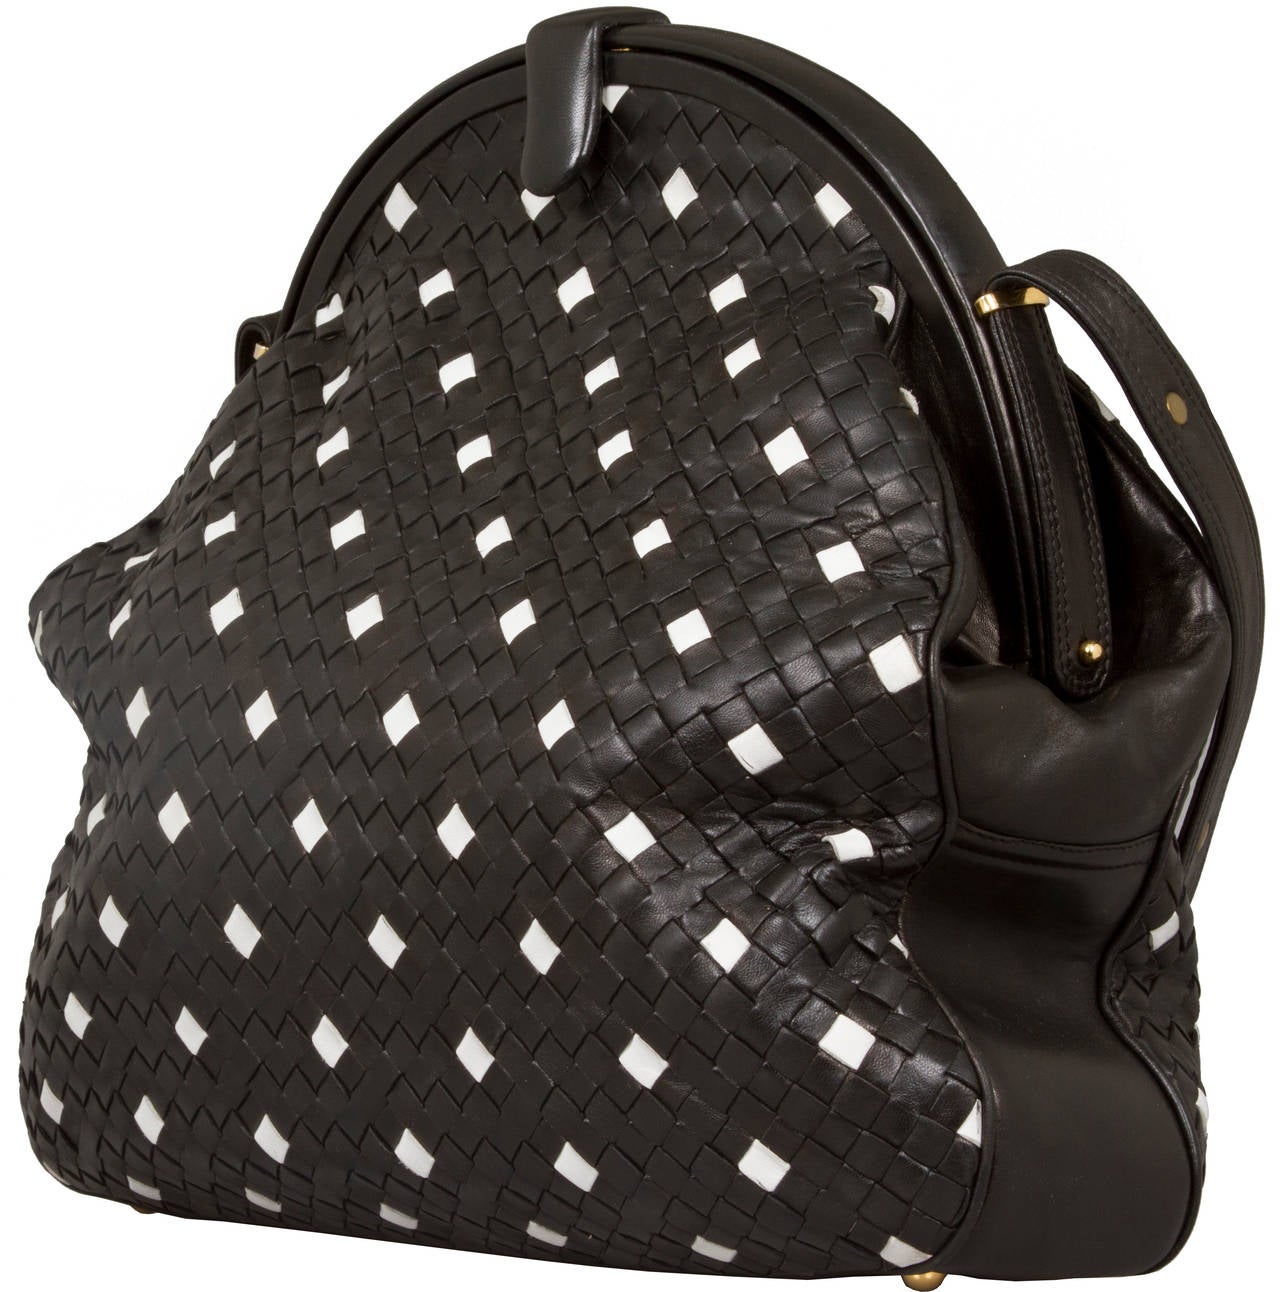 This is a wonderful rendition of a large coin purse in a great black and white pattern that would work all year round. It can be carried on the shoulder